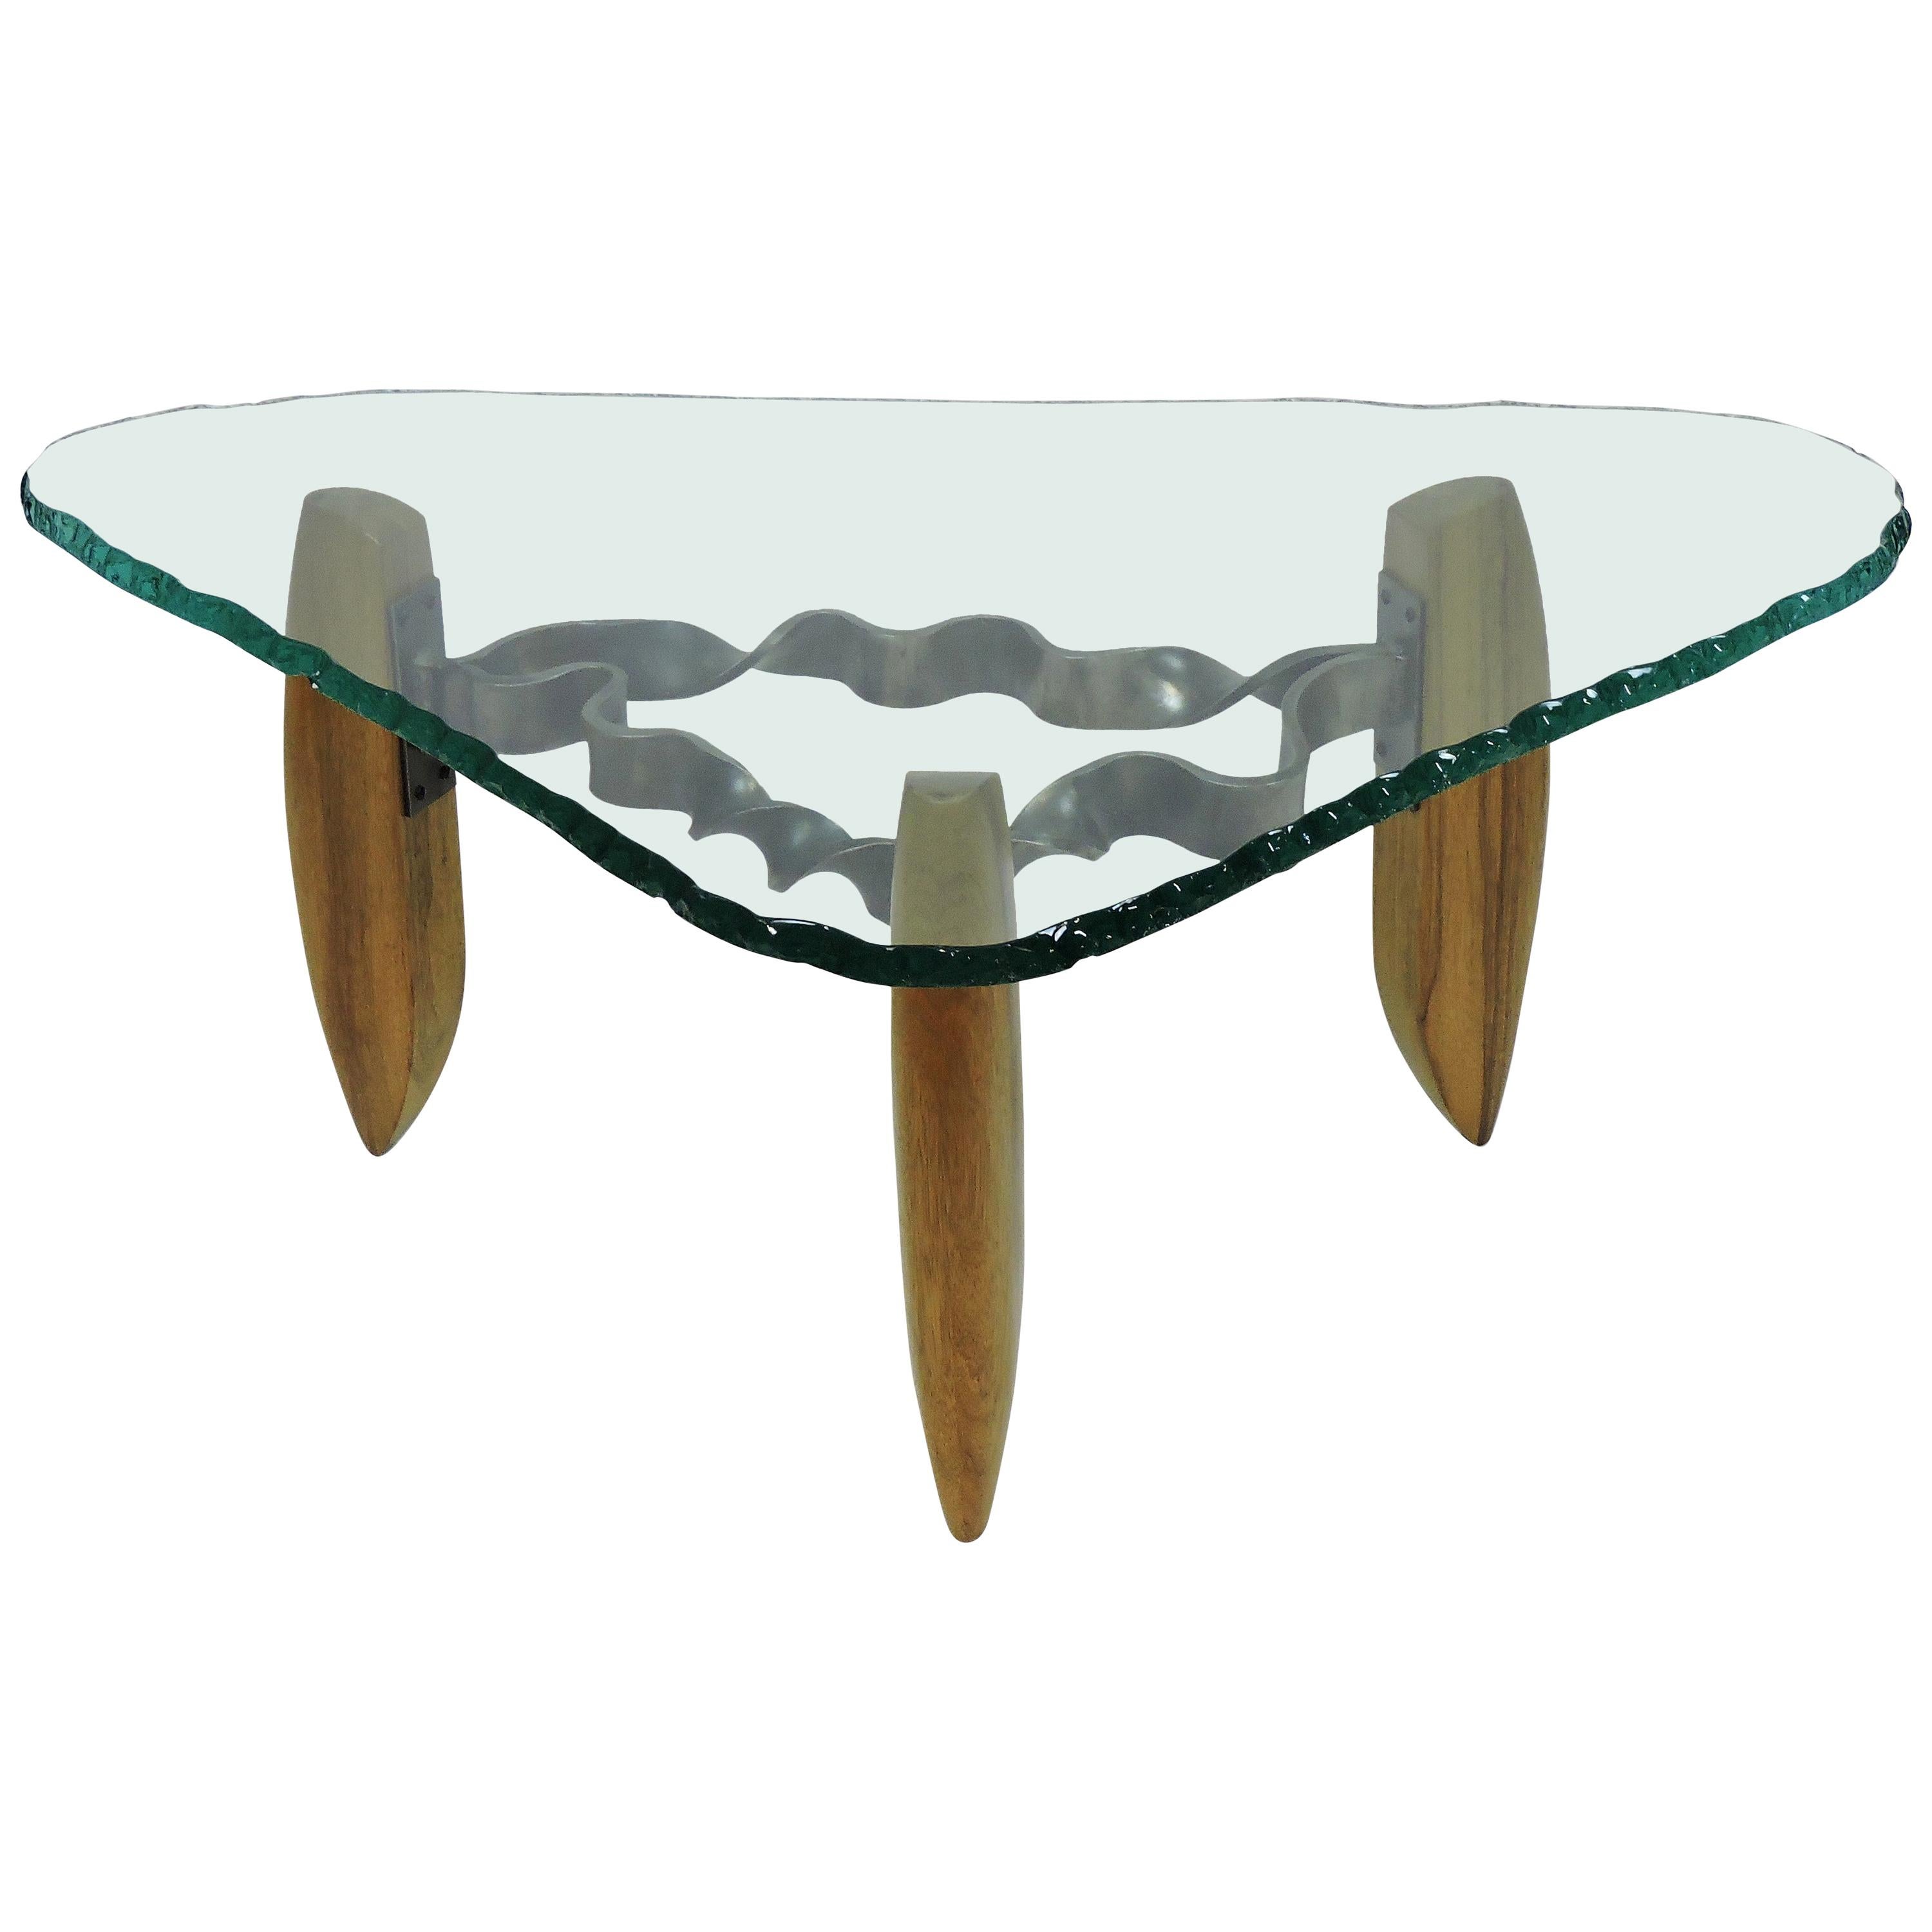 American Studio Silas Seandel Style Modernist Metal, Wood and Glass Coffee Table For Sale